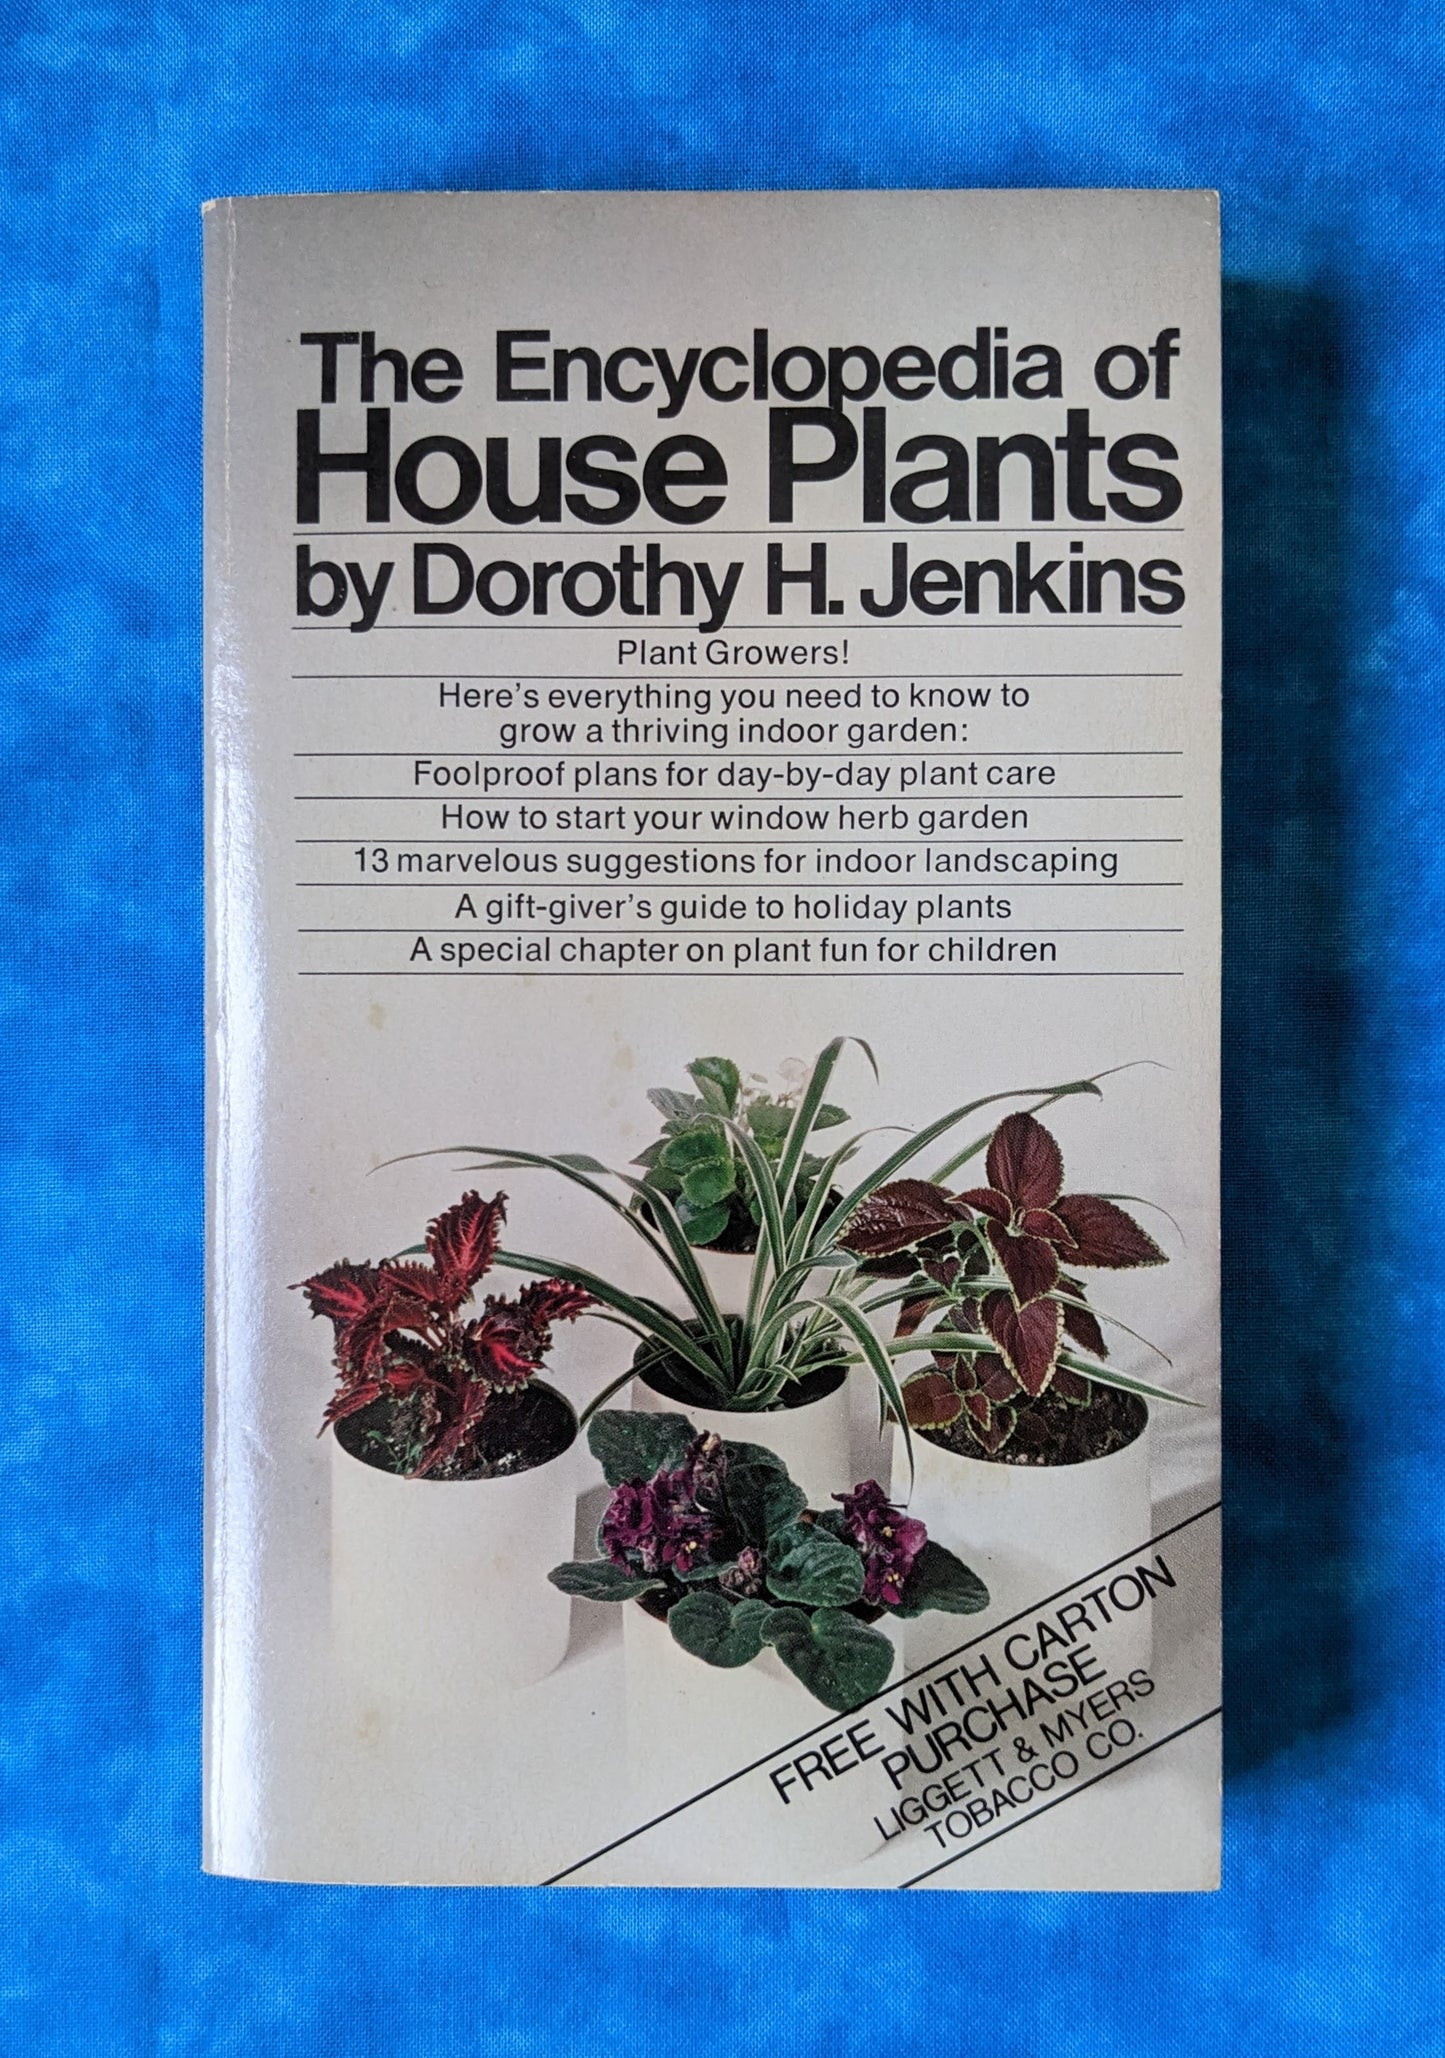 The Encyclopedia of House Plants vintage book front cover